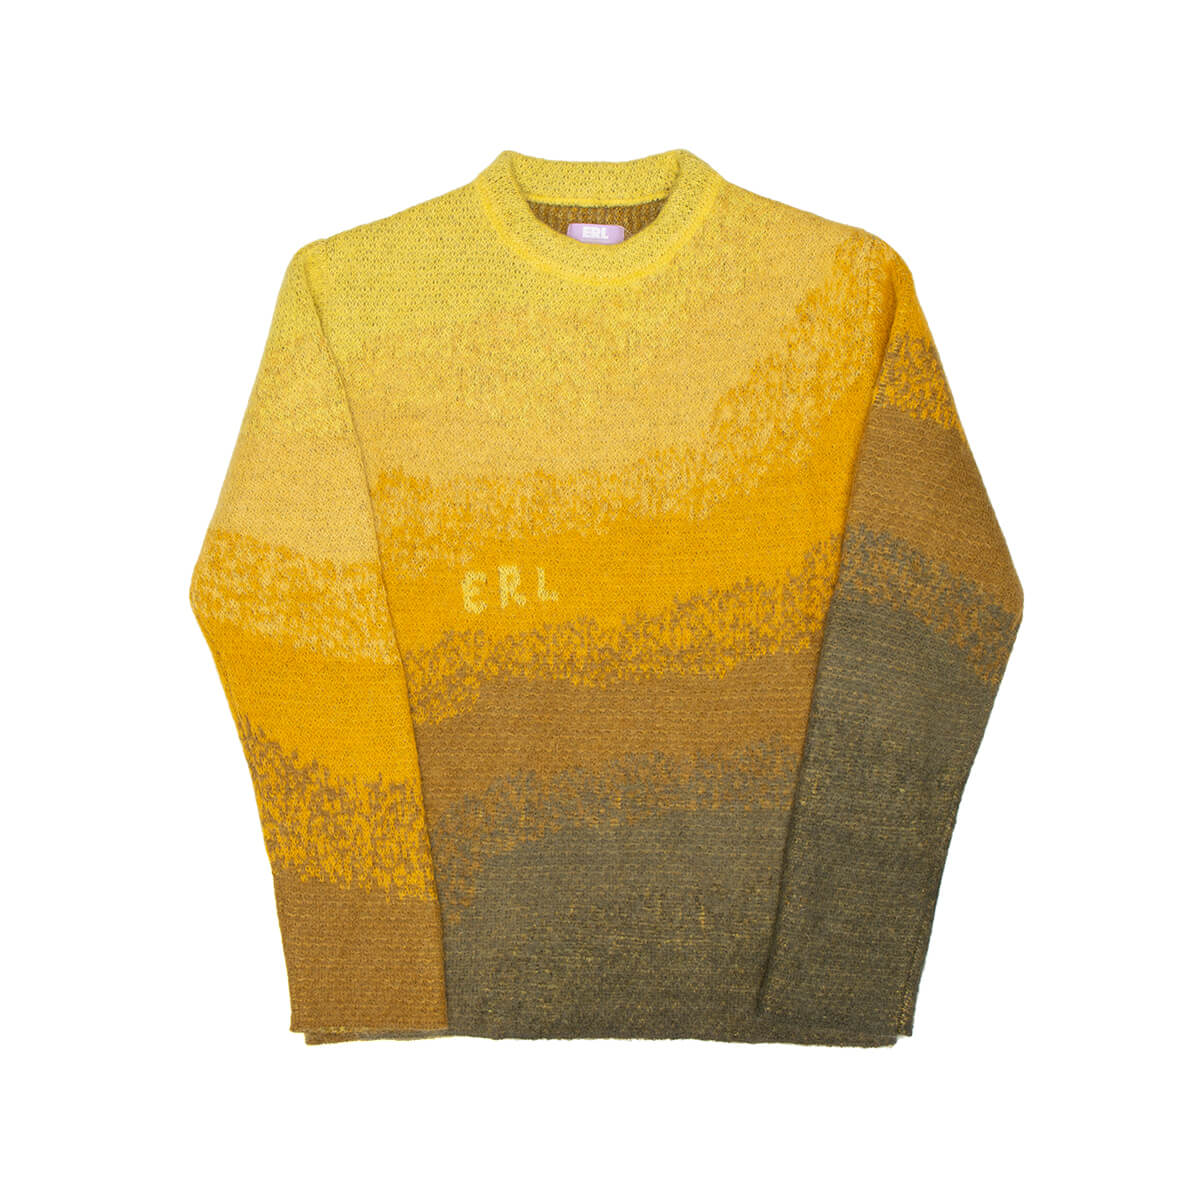 ERL Bowy Sweater